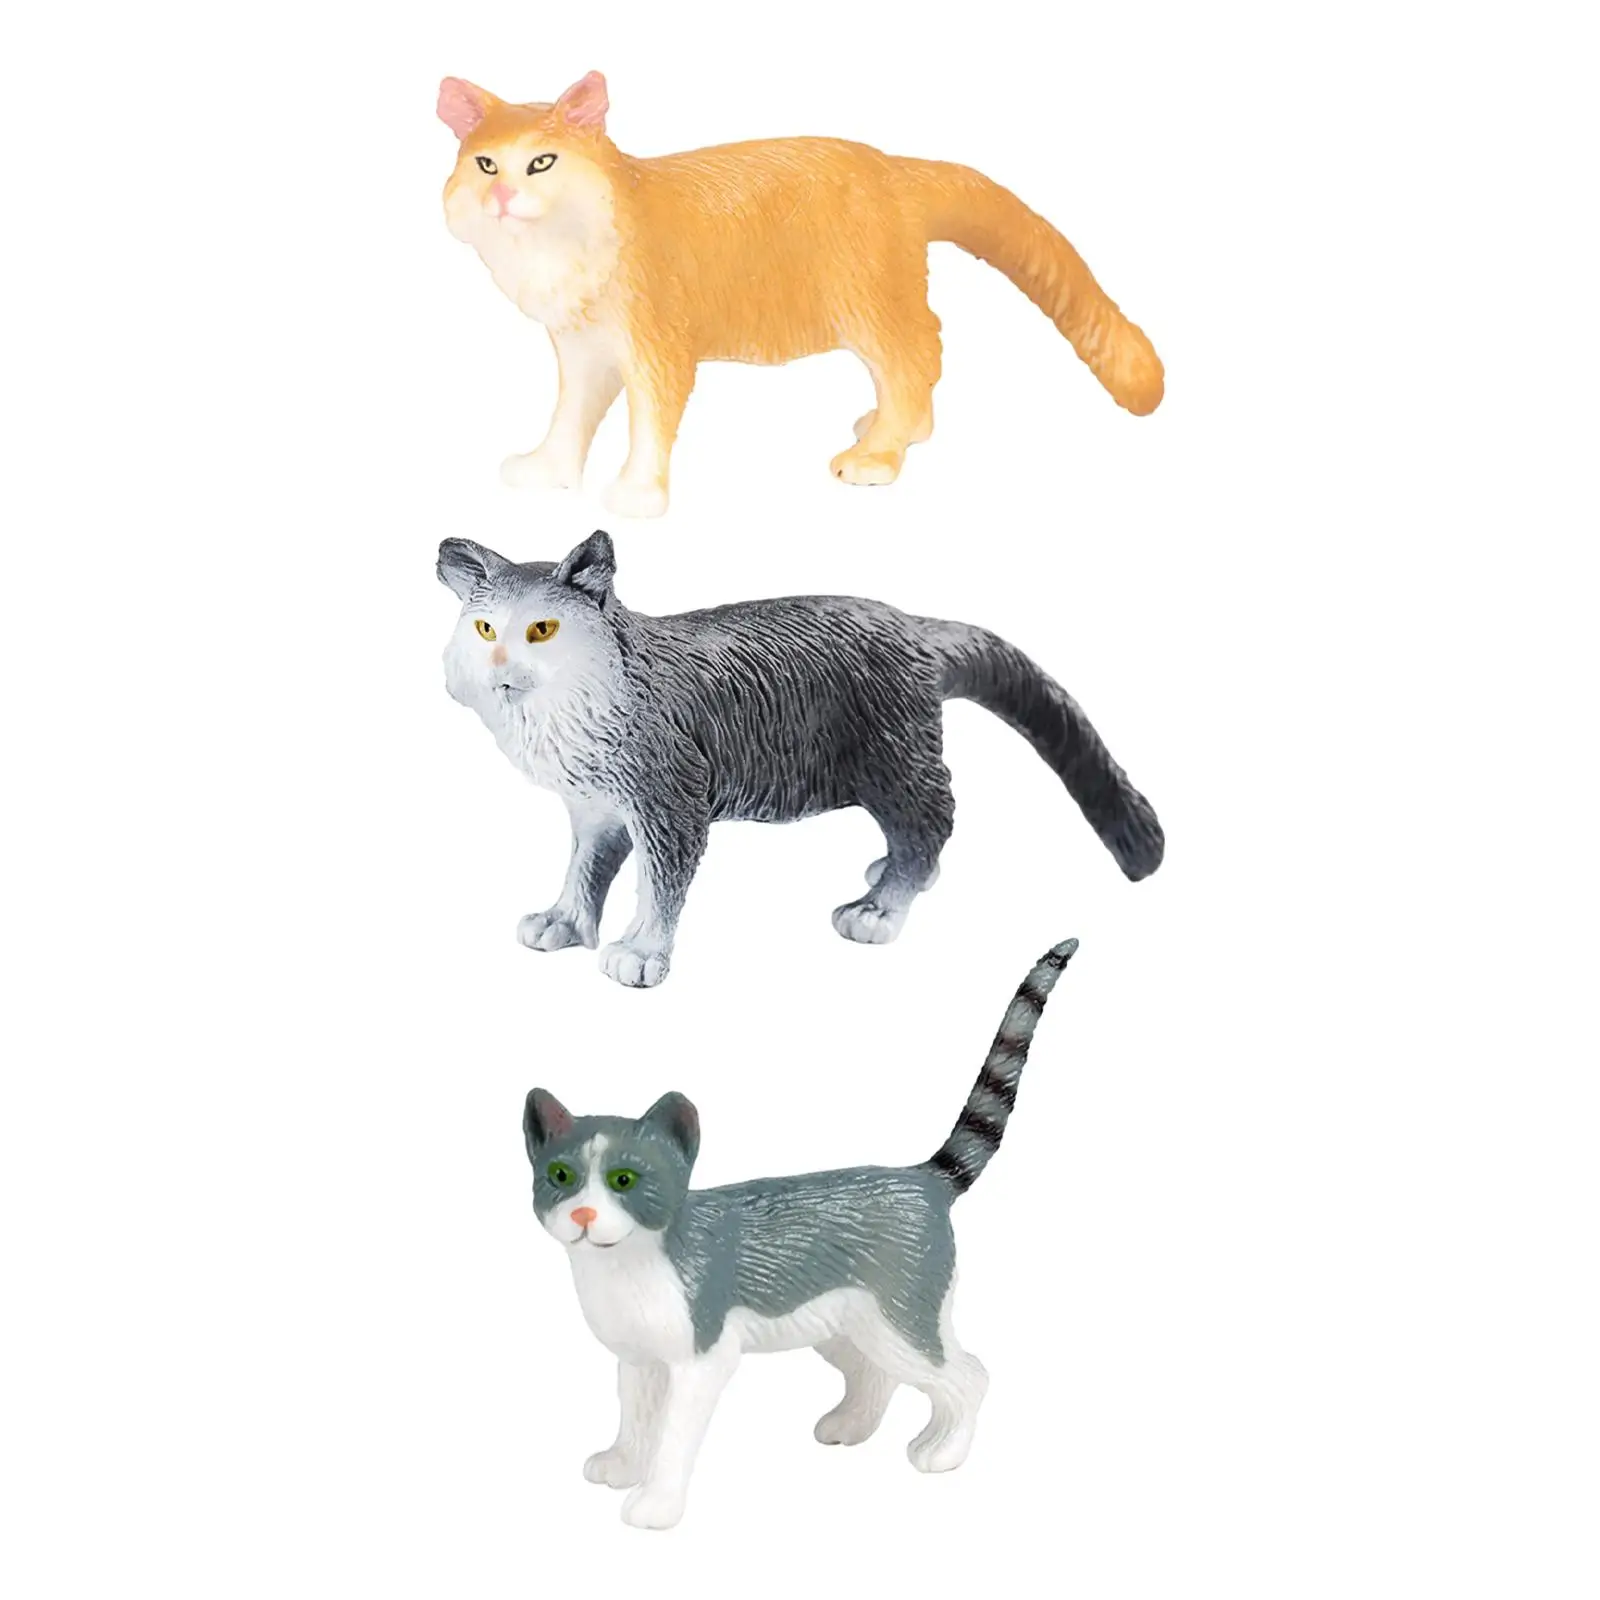 Simulation Animals Figures Educational Toys Small Cat Figures Toy Cat Figurines for Home Decor Cake Topper Party Favor